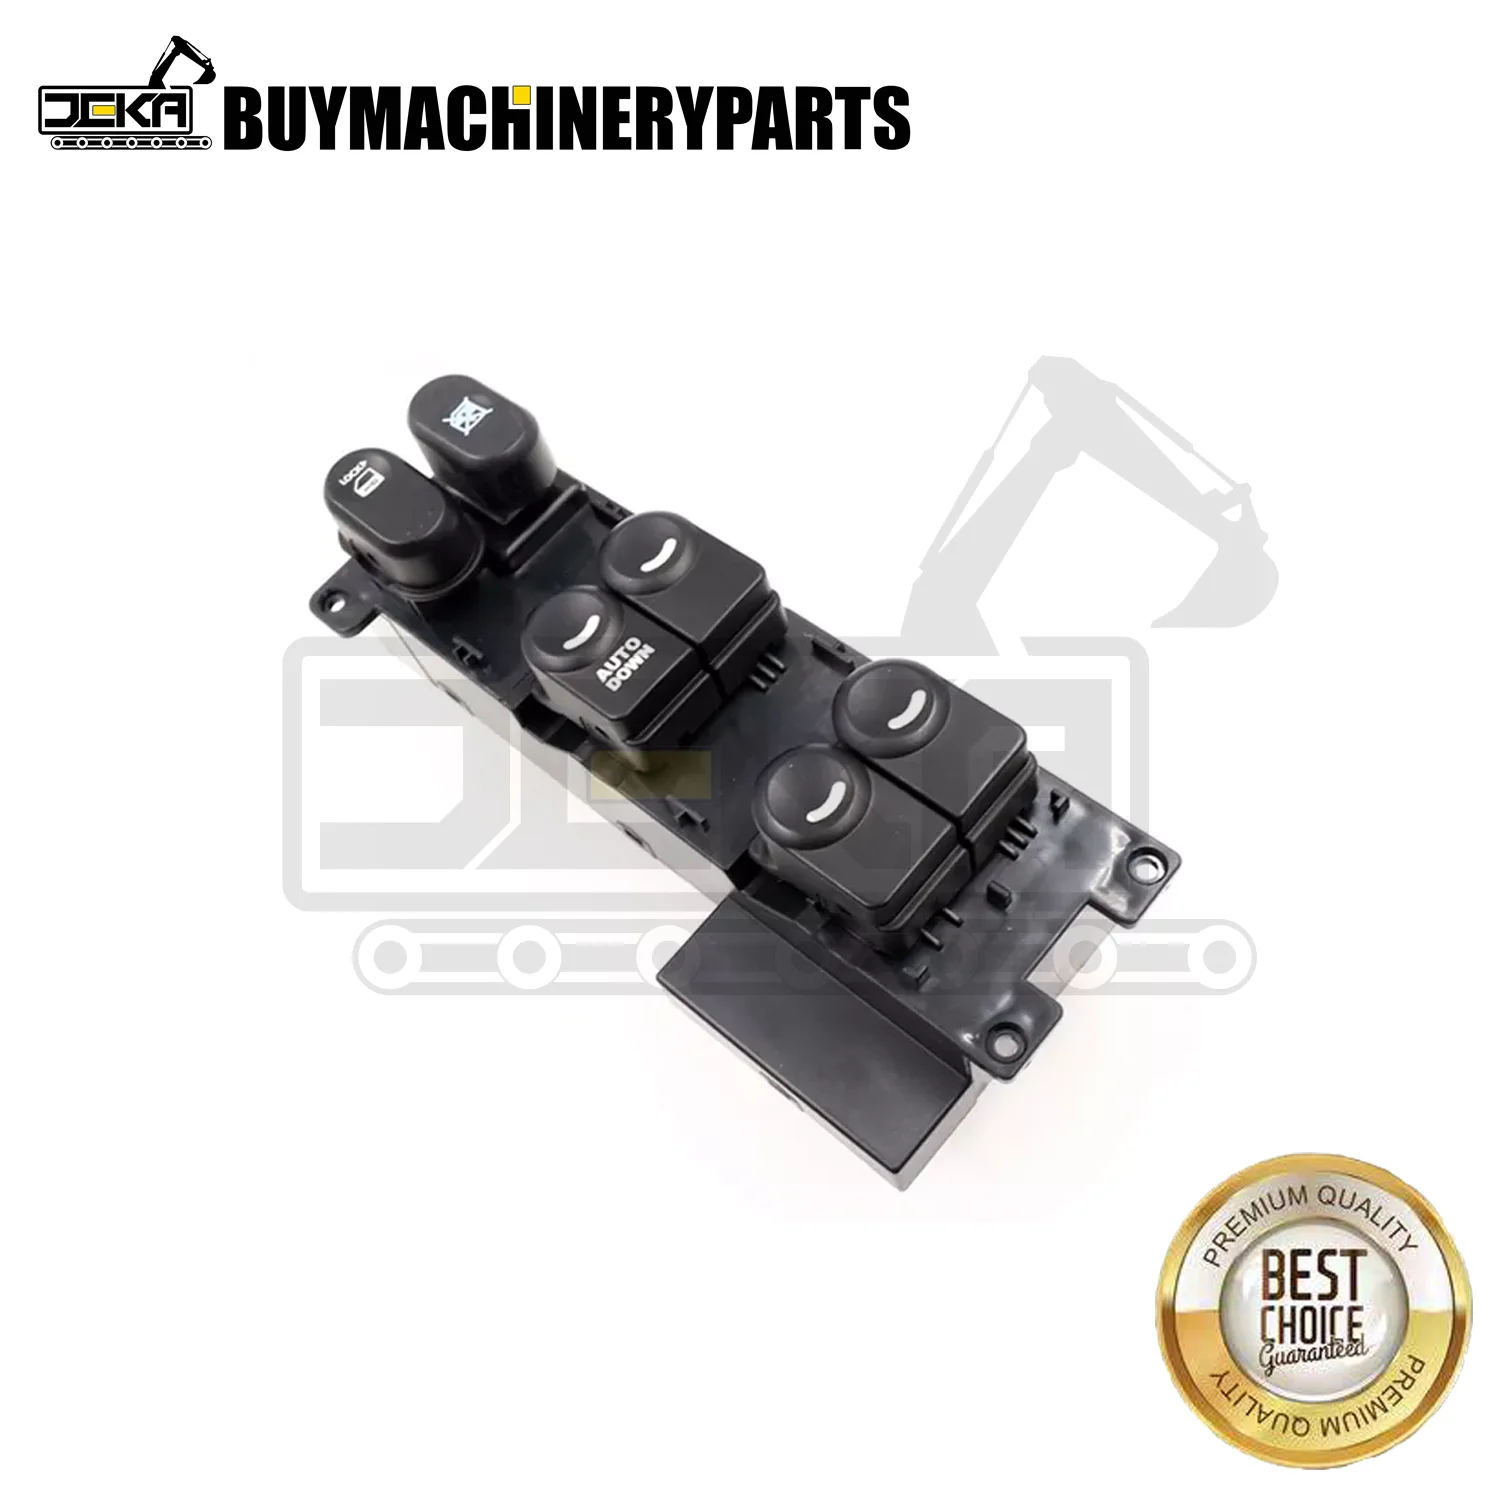 

New For Hyundai i30 I30cw 2008-2011 Car Window Lifter Switch driver's Side Front Left Control Switch 93570-2L010 93570-2L000